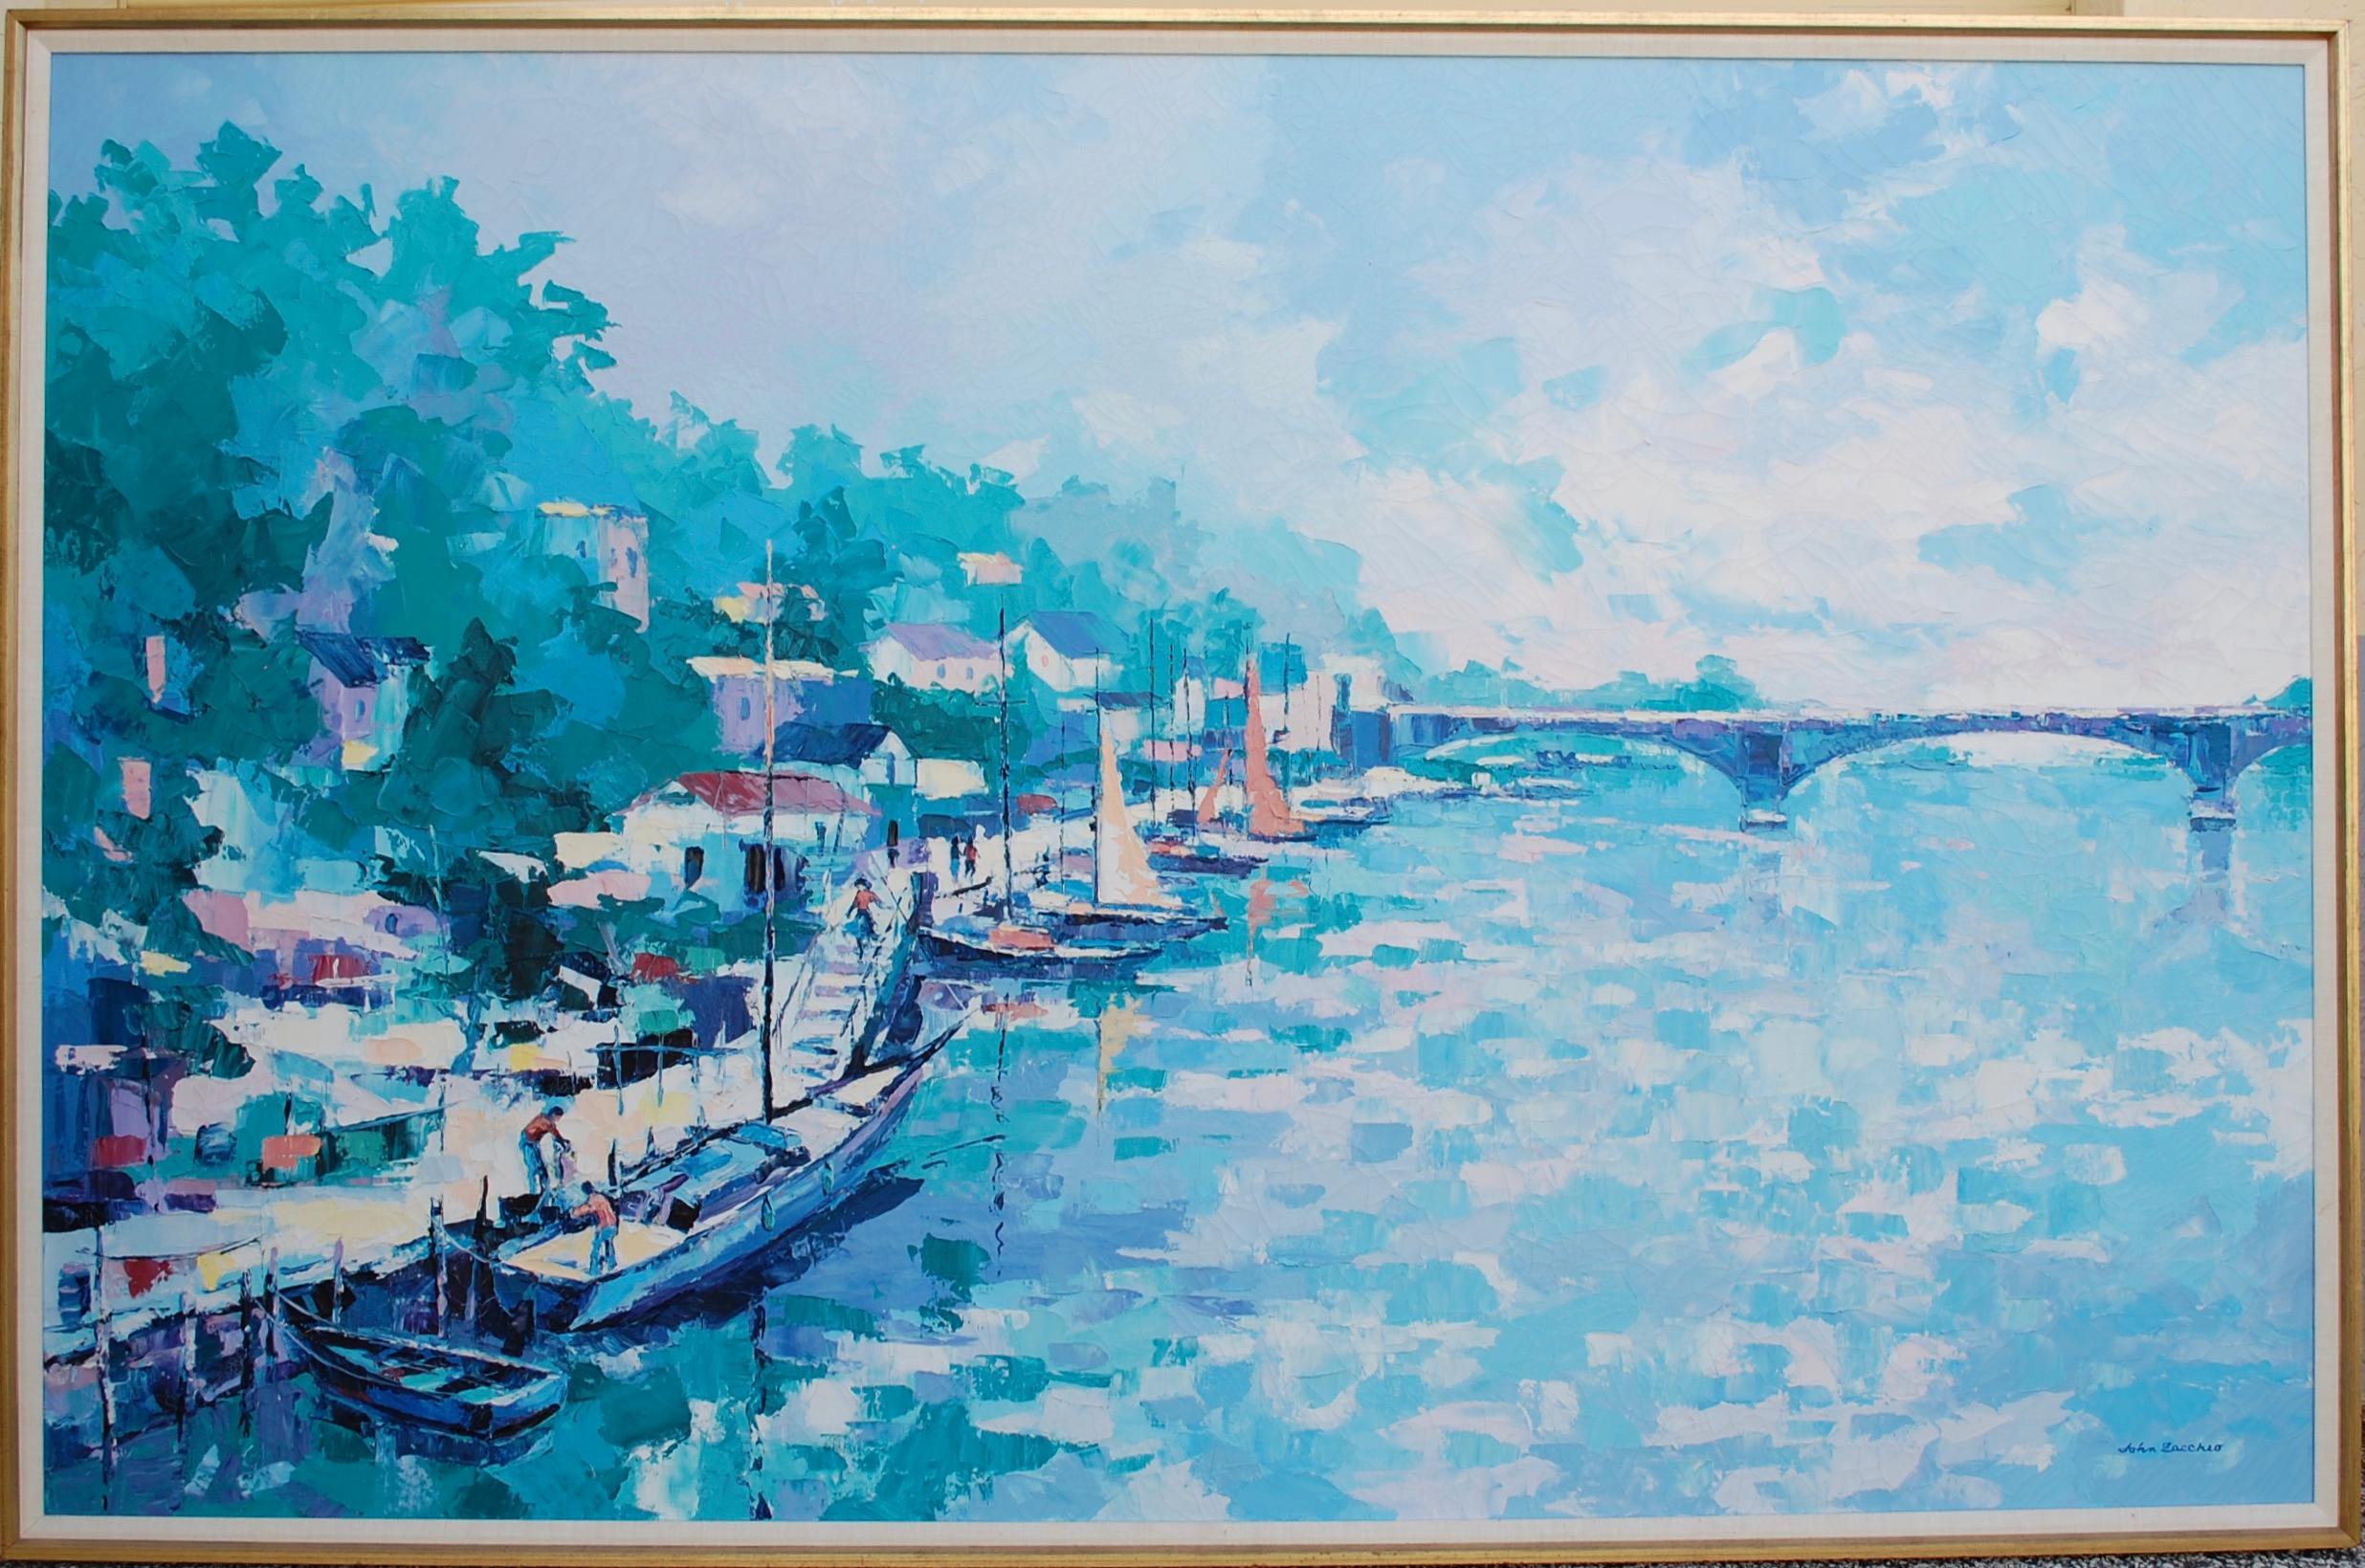 View Of The Mediterranean Seacoast Large Oil Painting
Artist signed lower left corner.
John Zaccheo, known for his exquisite portraits and vibrant paintings of Mediterranean seascapes as well as alluring flowering gardens and country settings is a